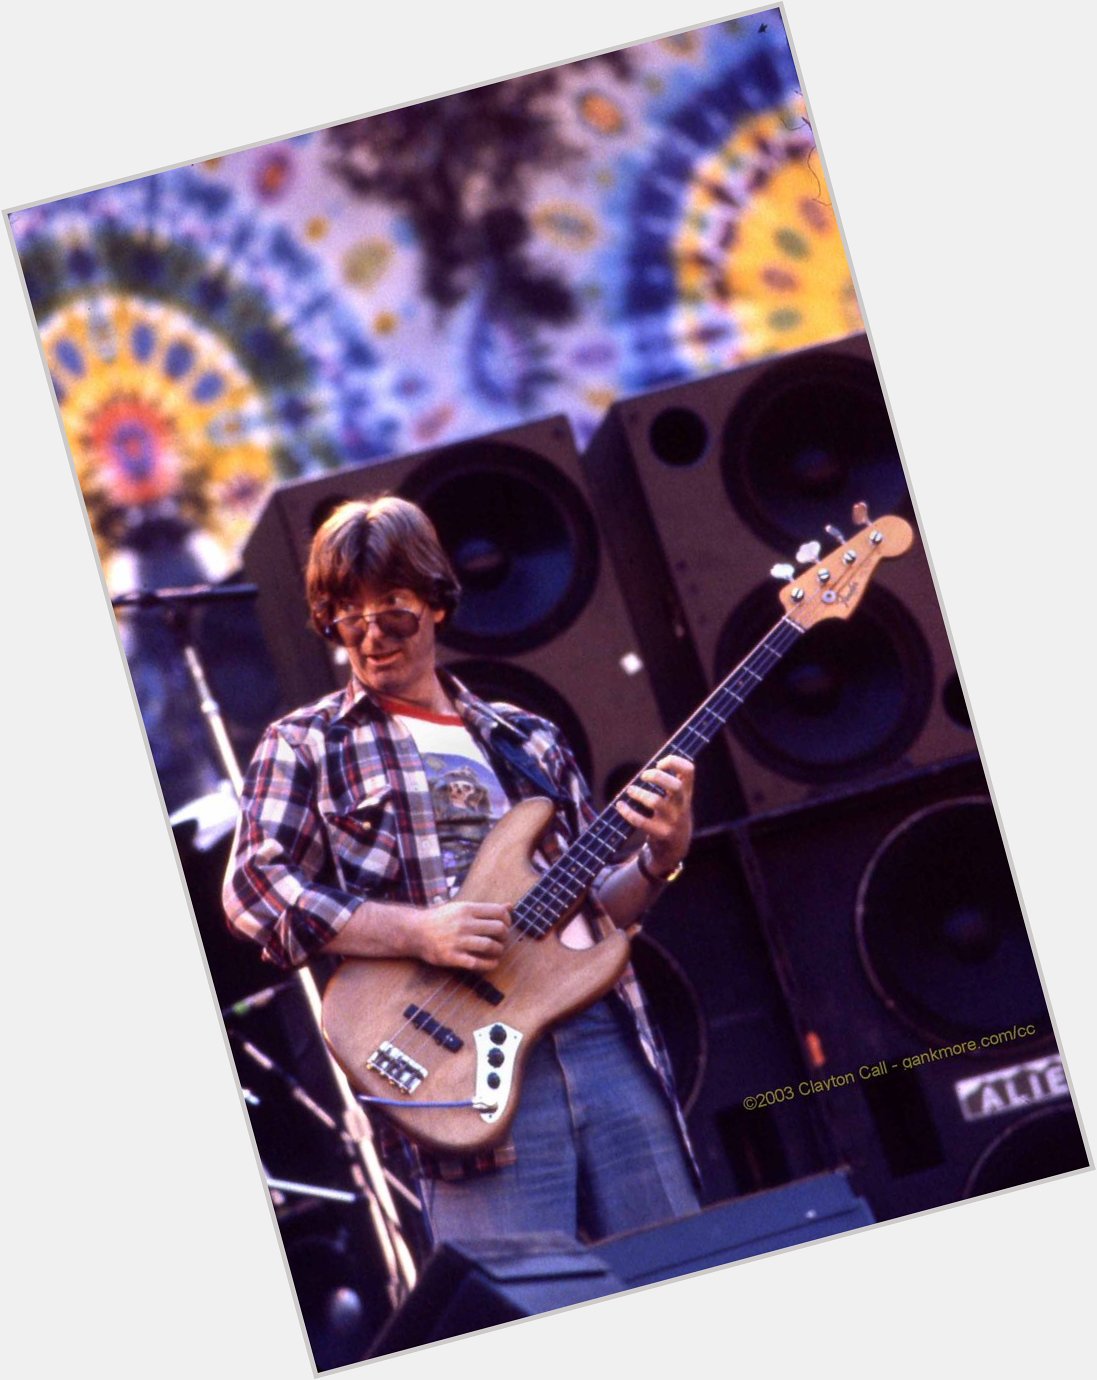 Happy 81st Birthday, Phil Lesh! 

Here s 4 photos of Phil playin a Fender Jazz Bass. You re welcome. 